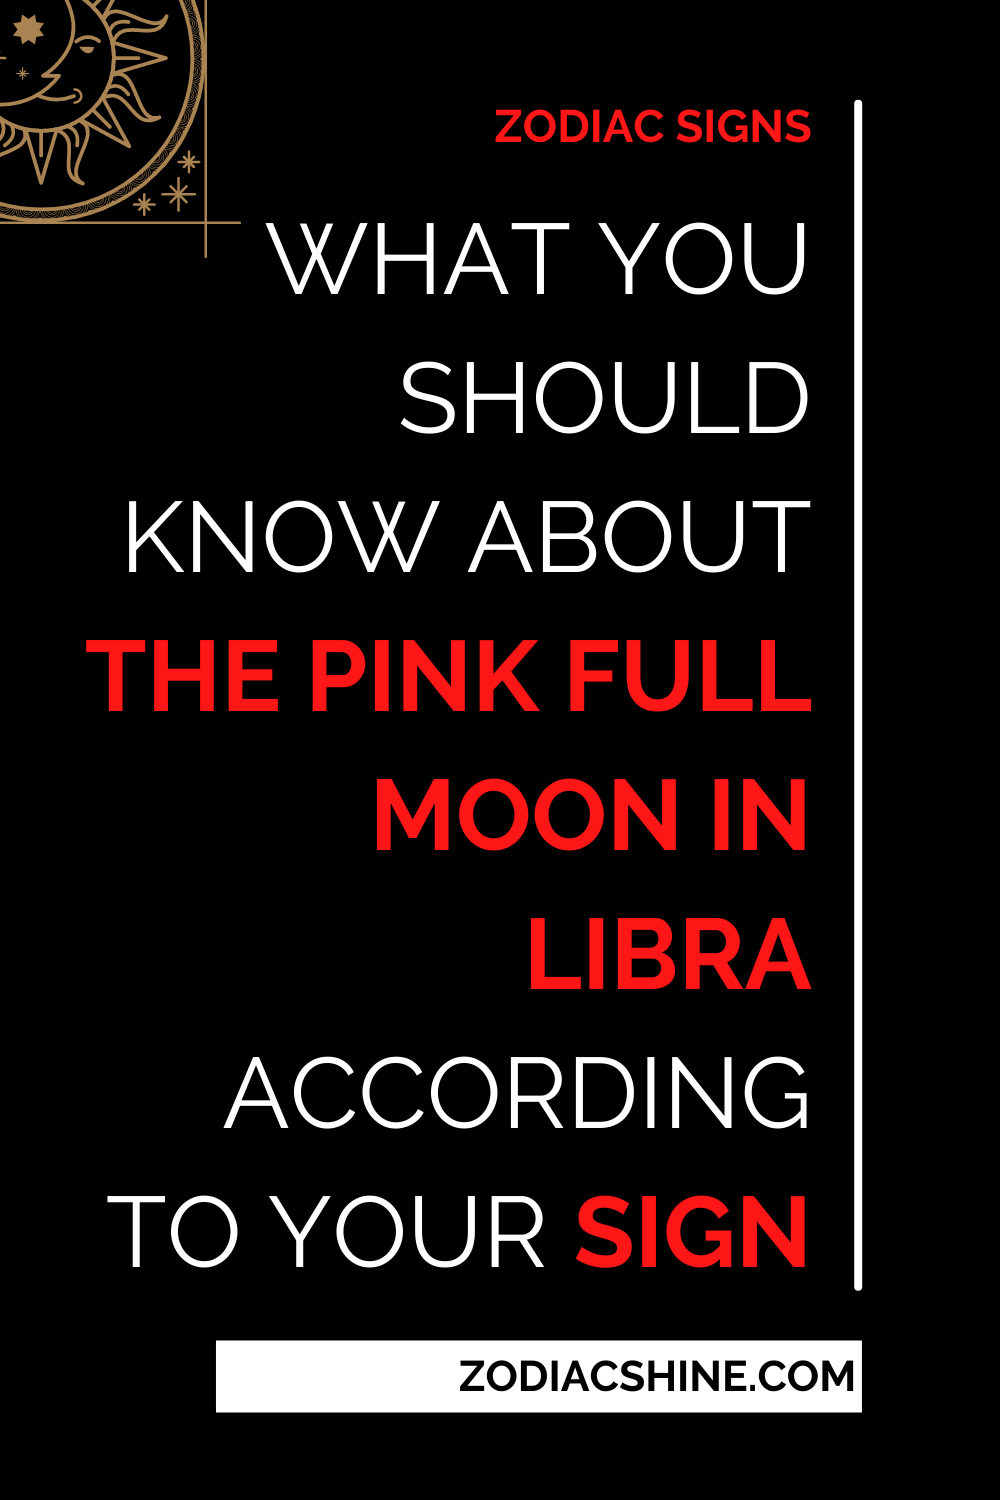 What You Should Know About The Pink Full Moon In Libra According To Your Sign